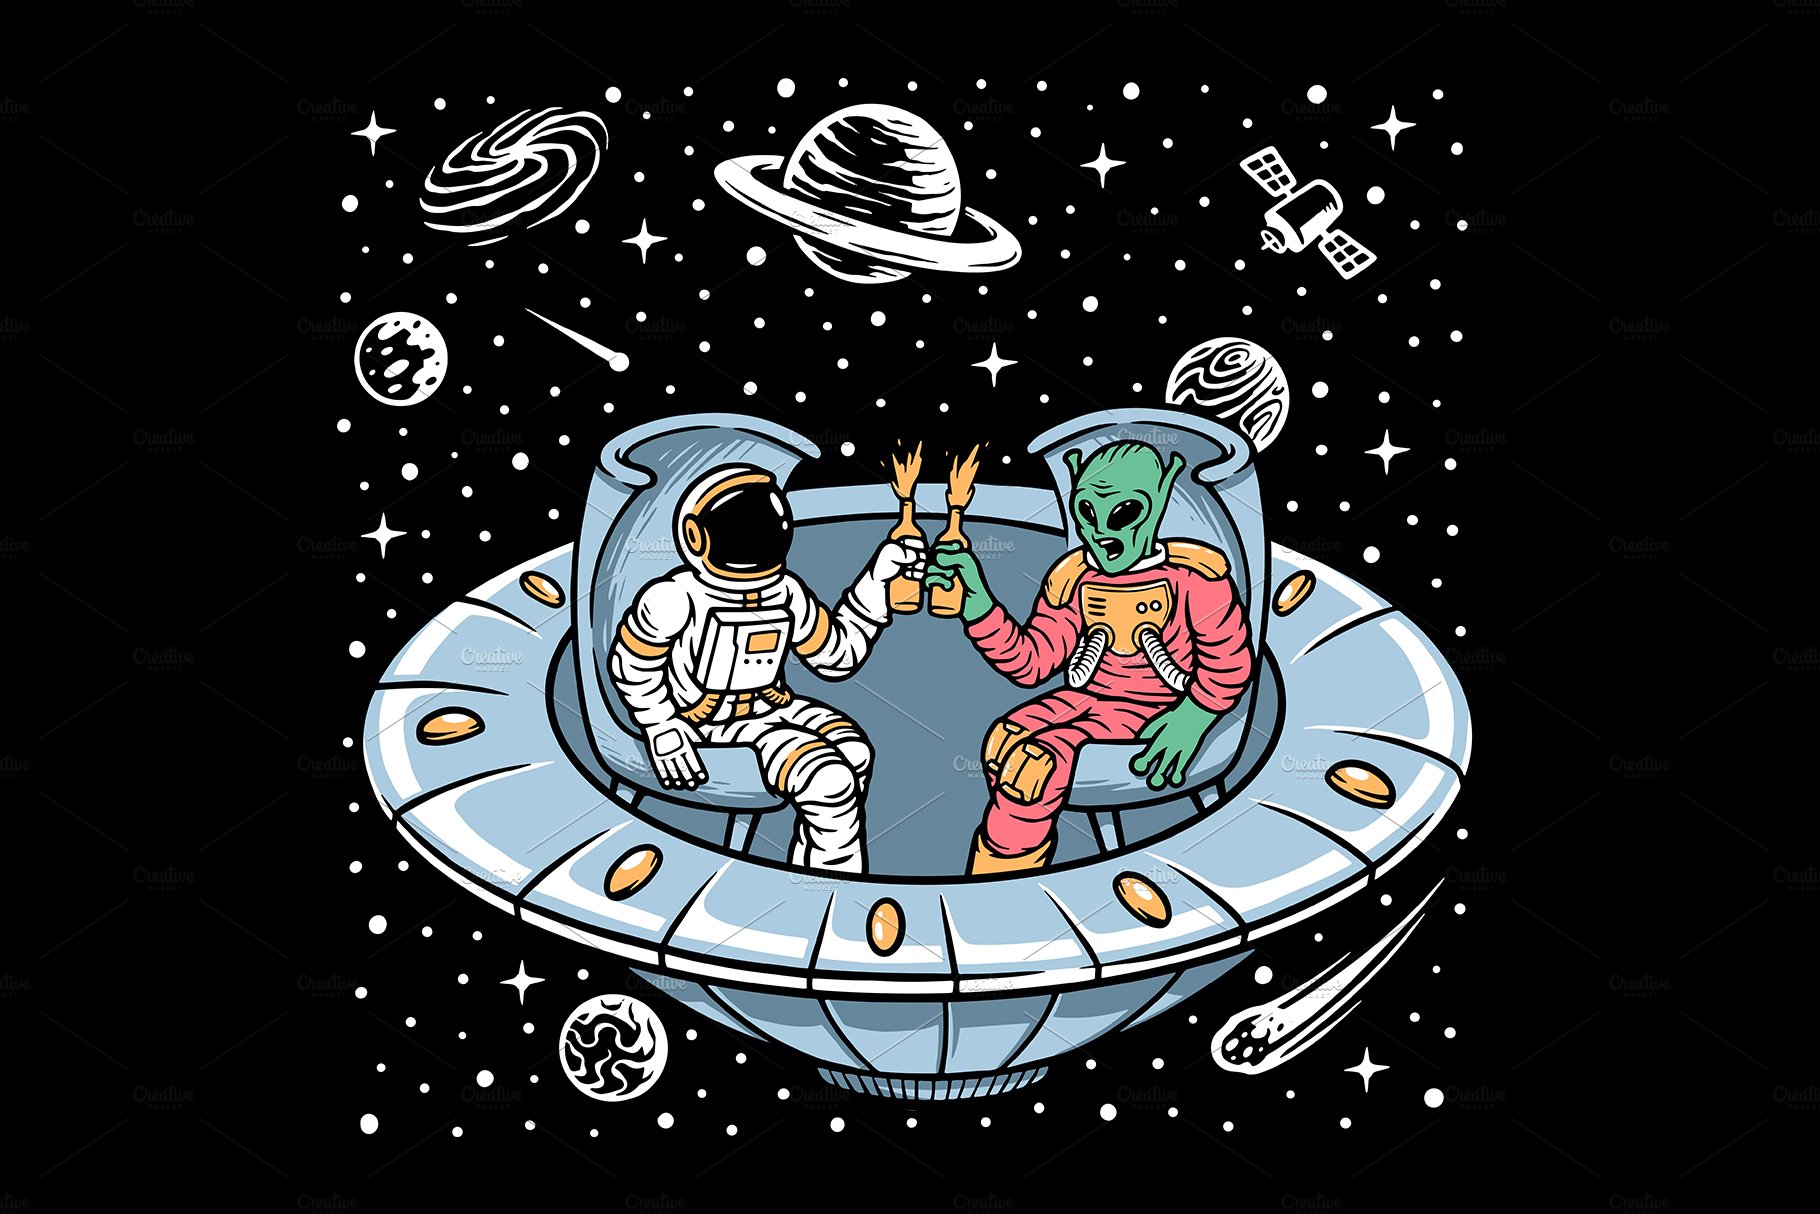 Astronaut and alien chill together cover image.